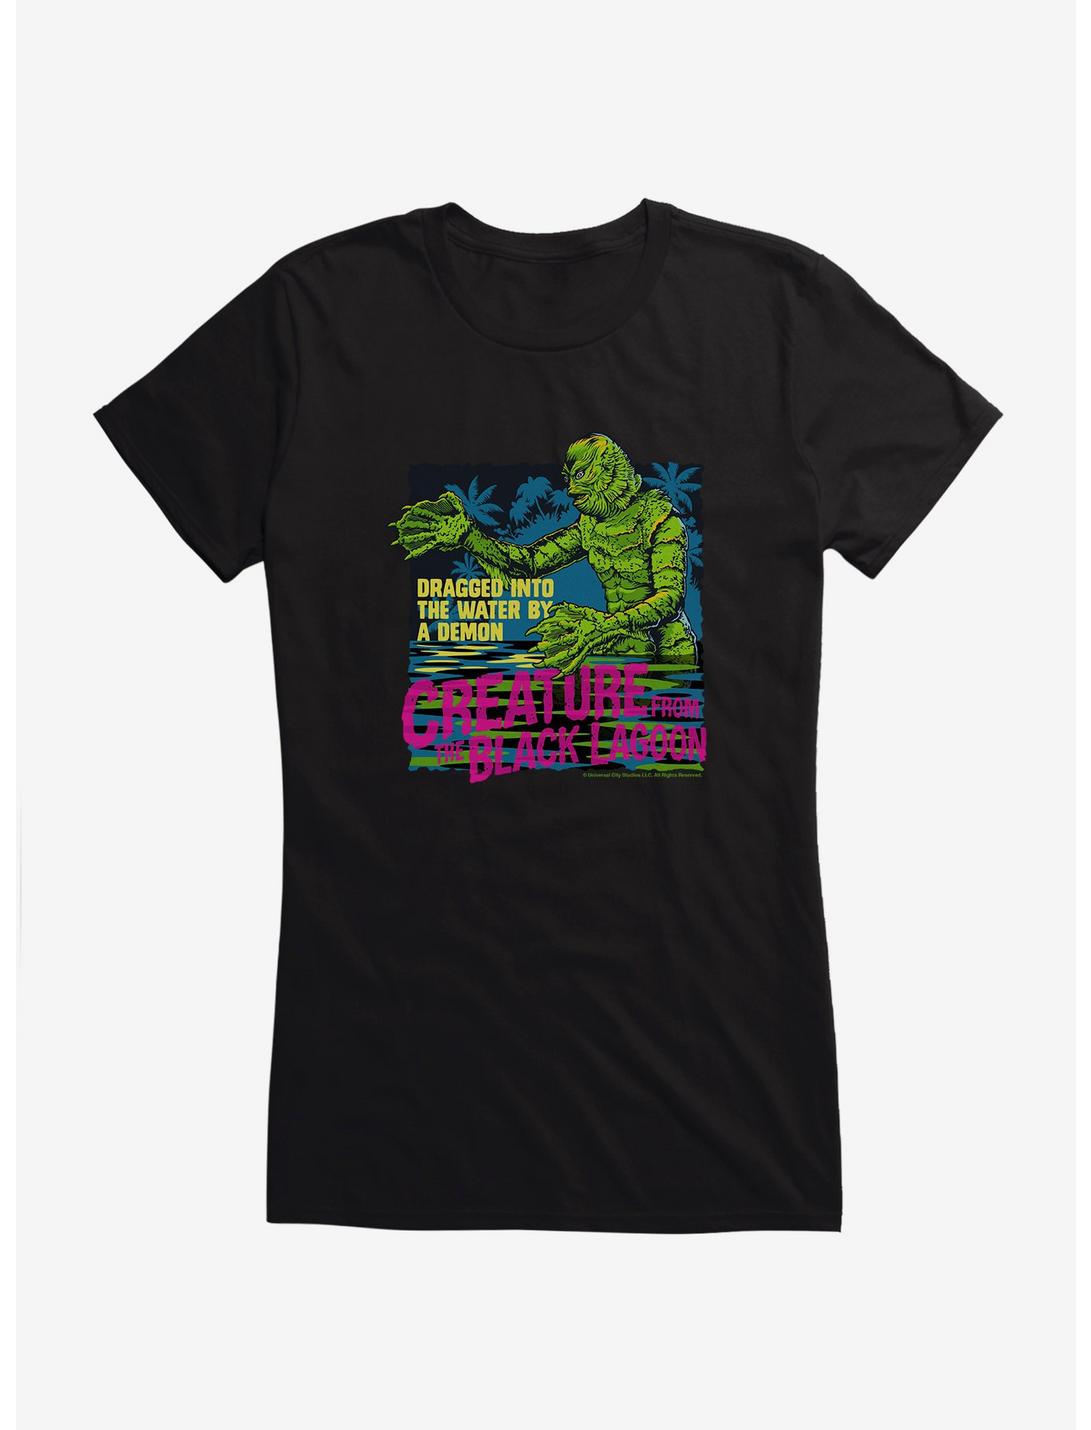 Creature From The Black Lagoon Dragged Into The Water By A Demon Girls T-Shirt, , hi-res